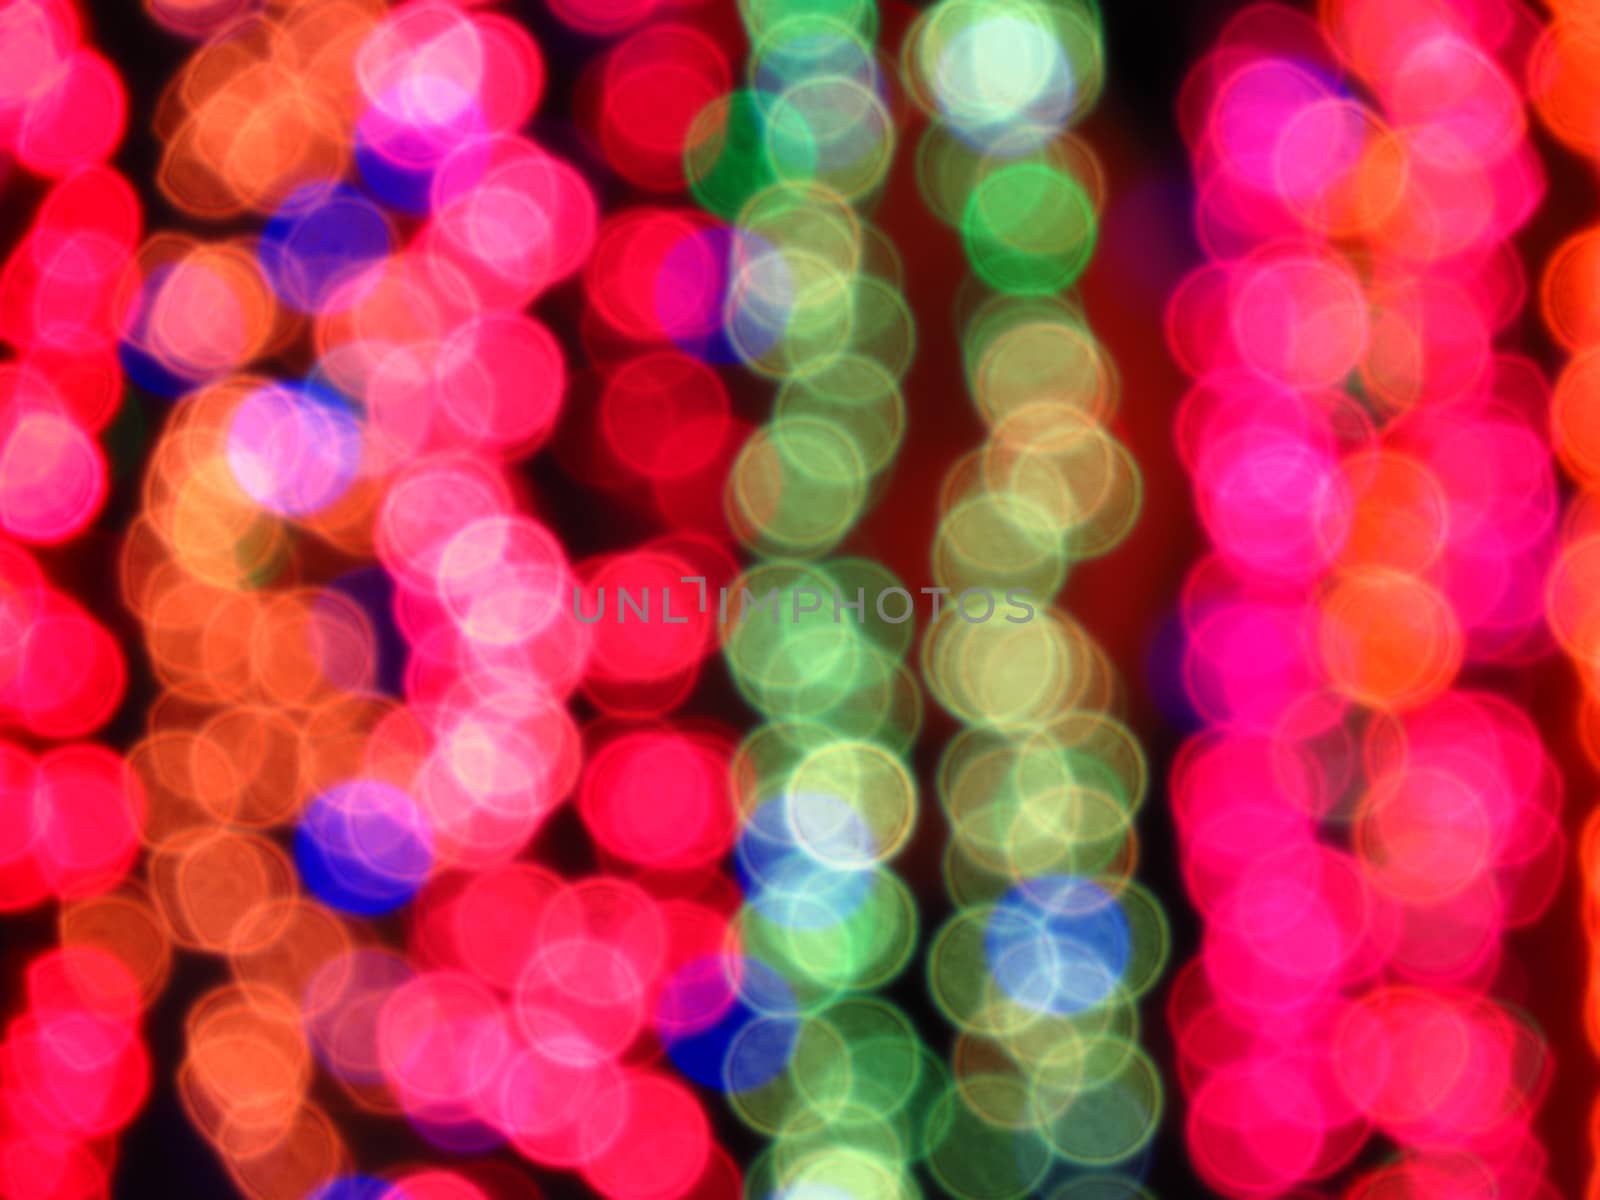 A blur background of colorful festival lights used for decoration.